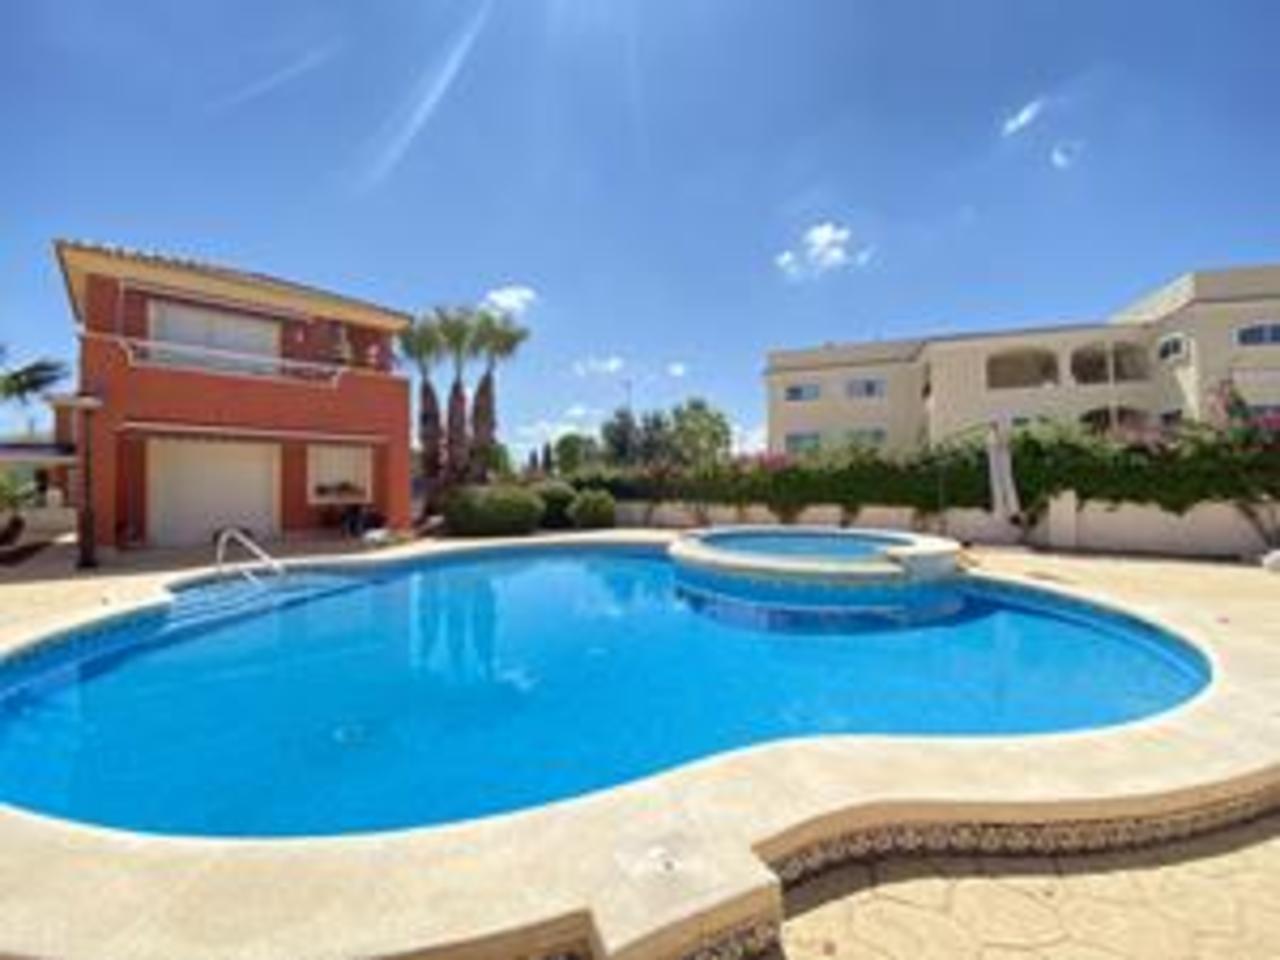 Ref: SVM671151-6 Villa for sale in Altaona Golf and Country Village